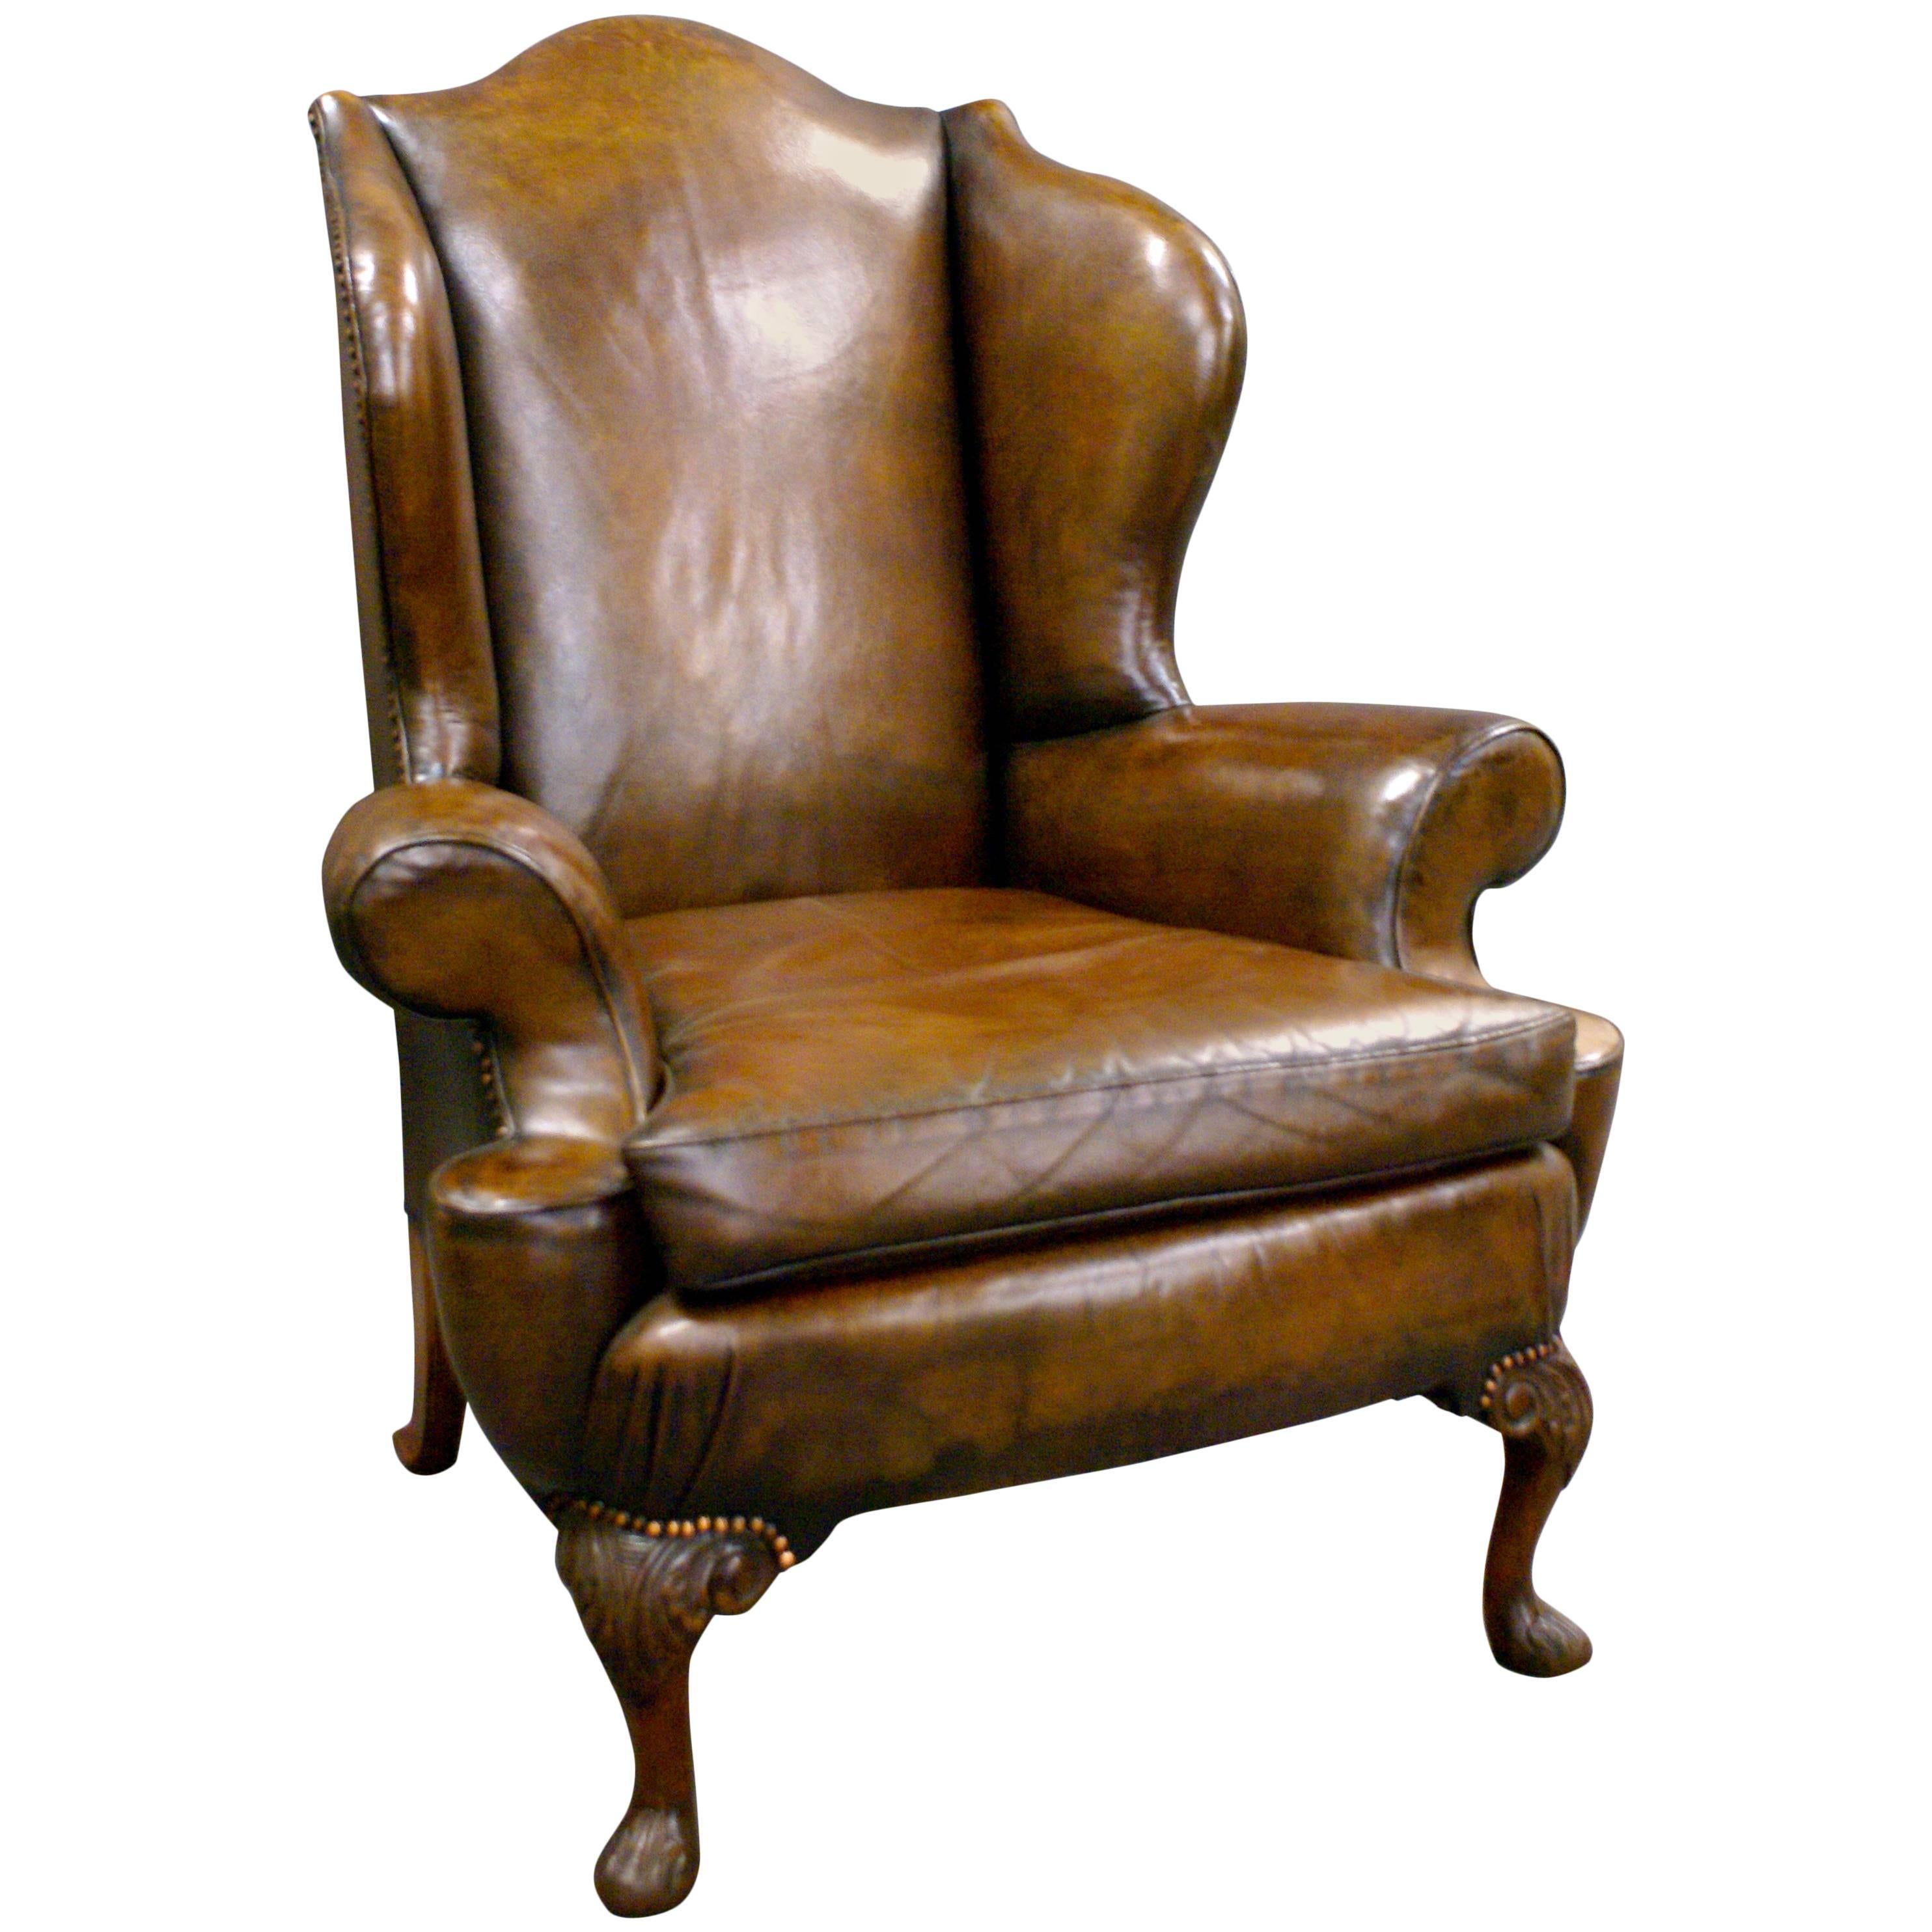 Georgian Revival Leather Upholstered Wingback Chair